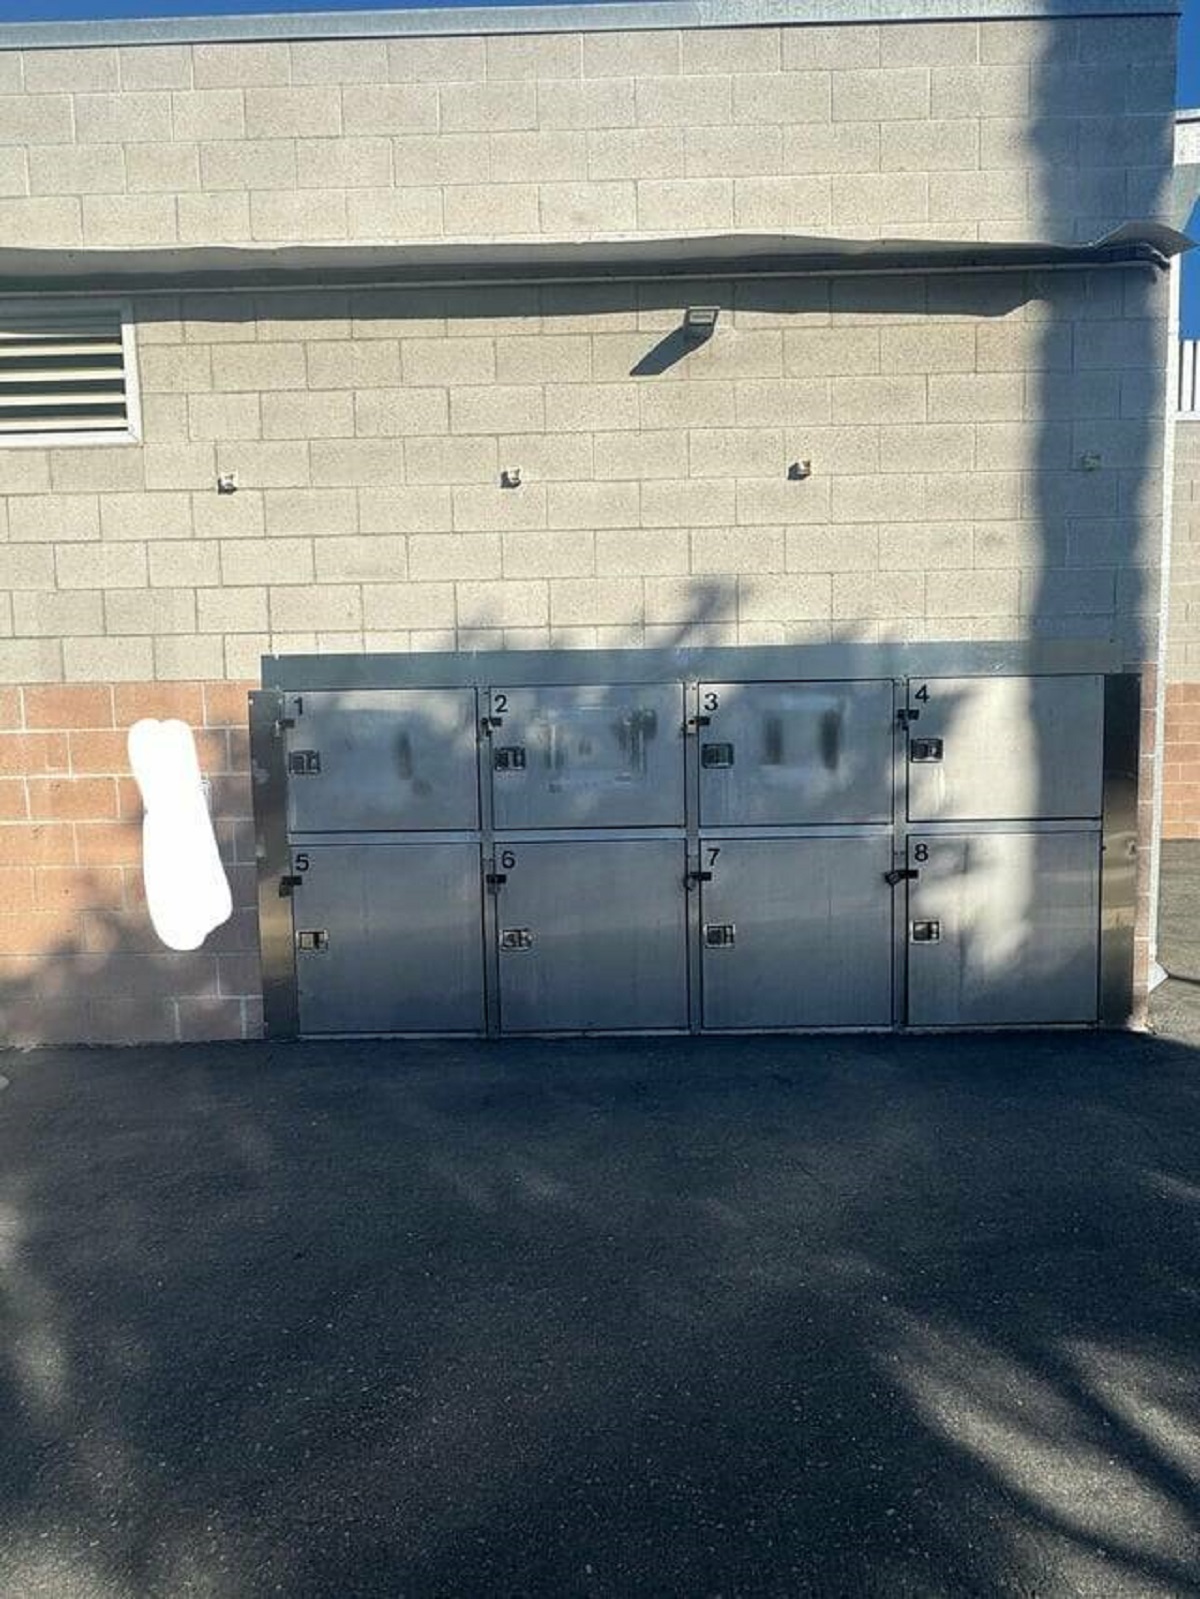 "The back alley of this animal shelter in San Diego has a night drop box for animals. The sign just the left has instructions for accessing a unit."